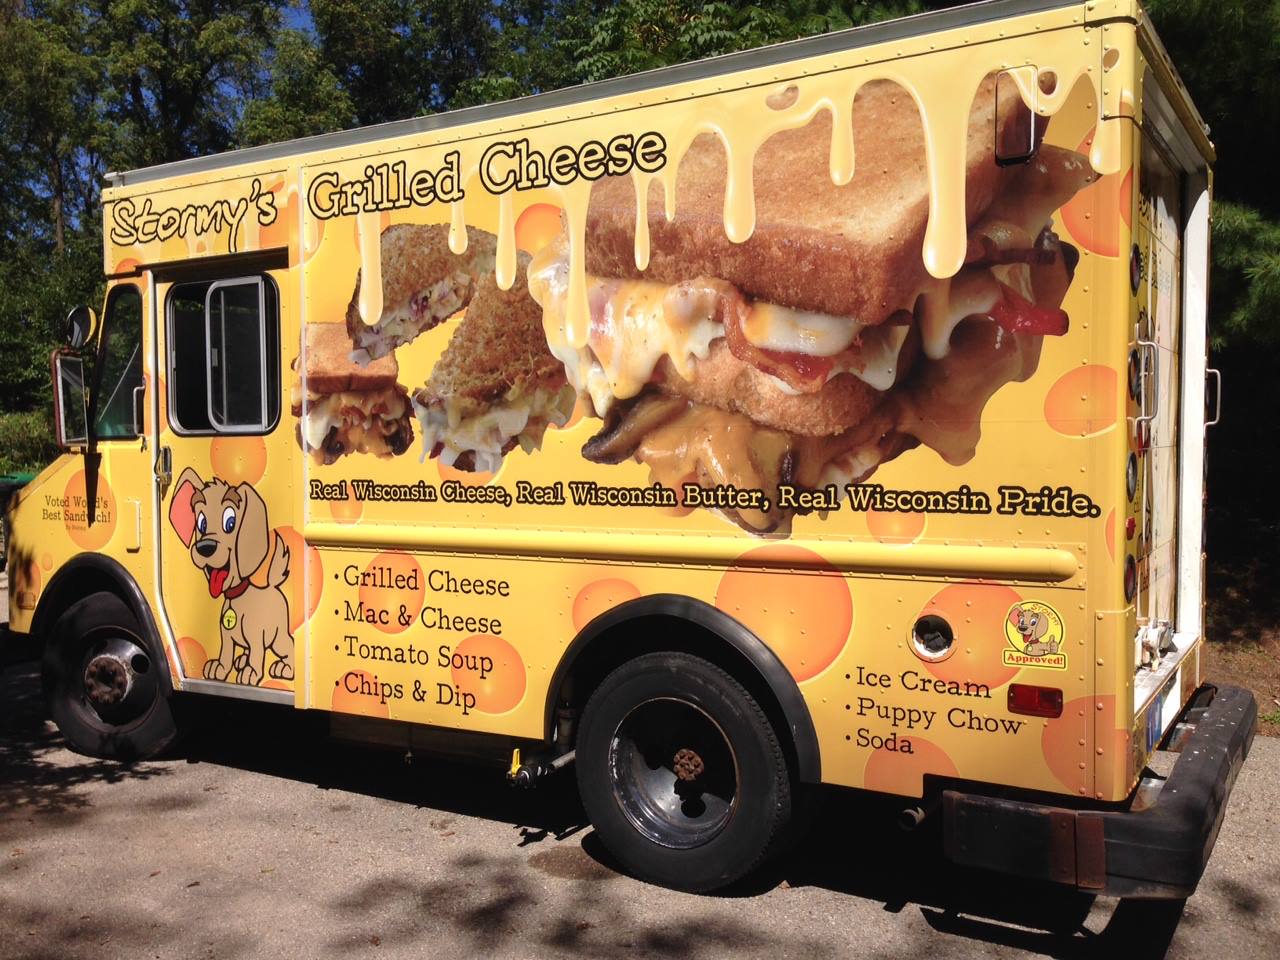 Stormy's Grilled Cheese Truck